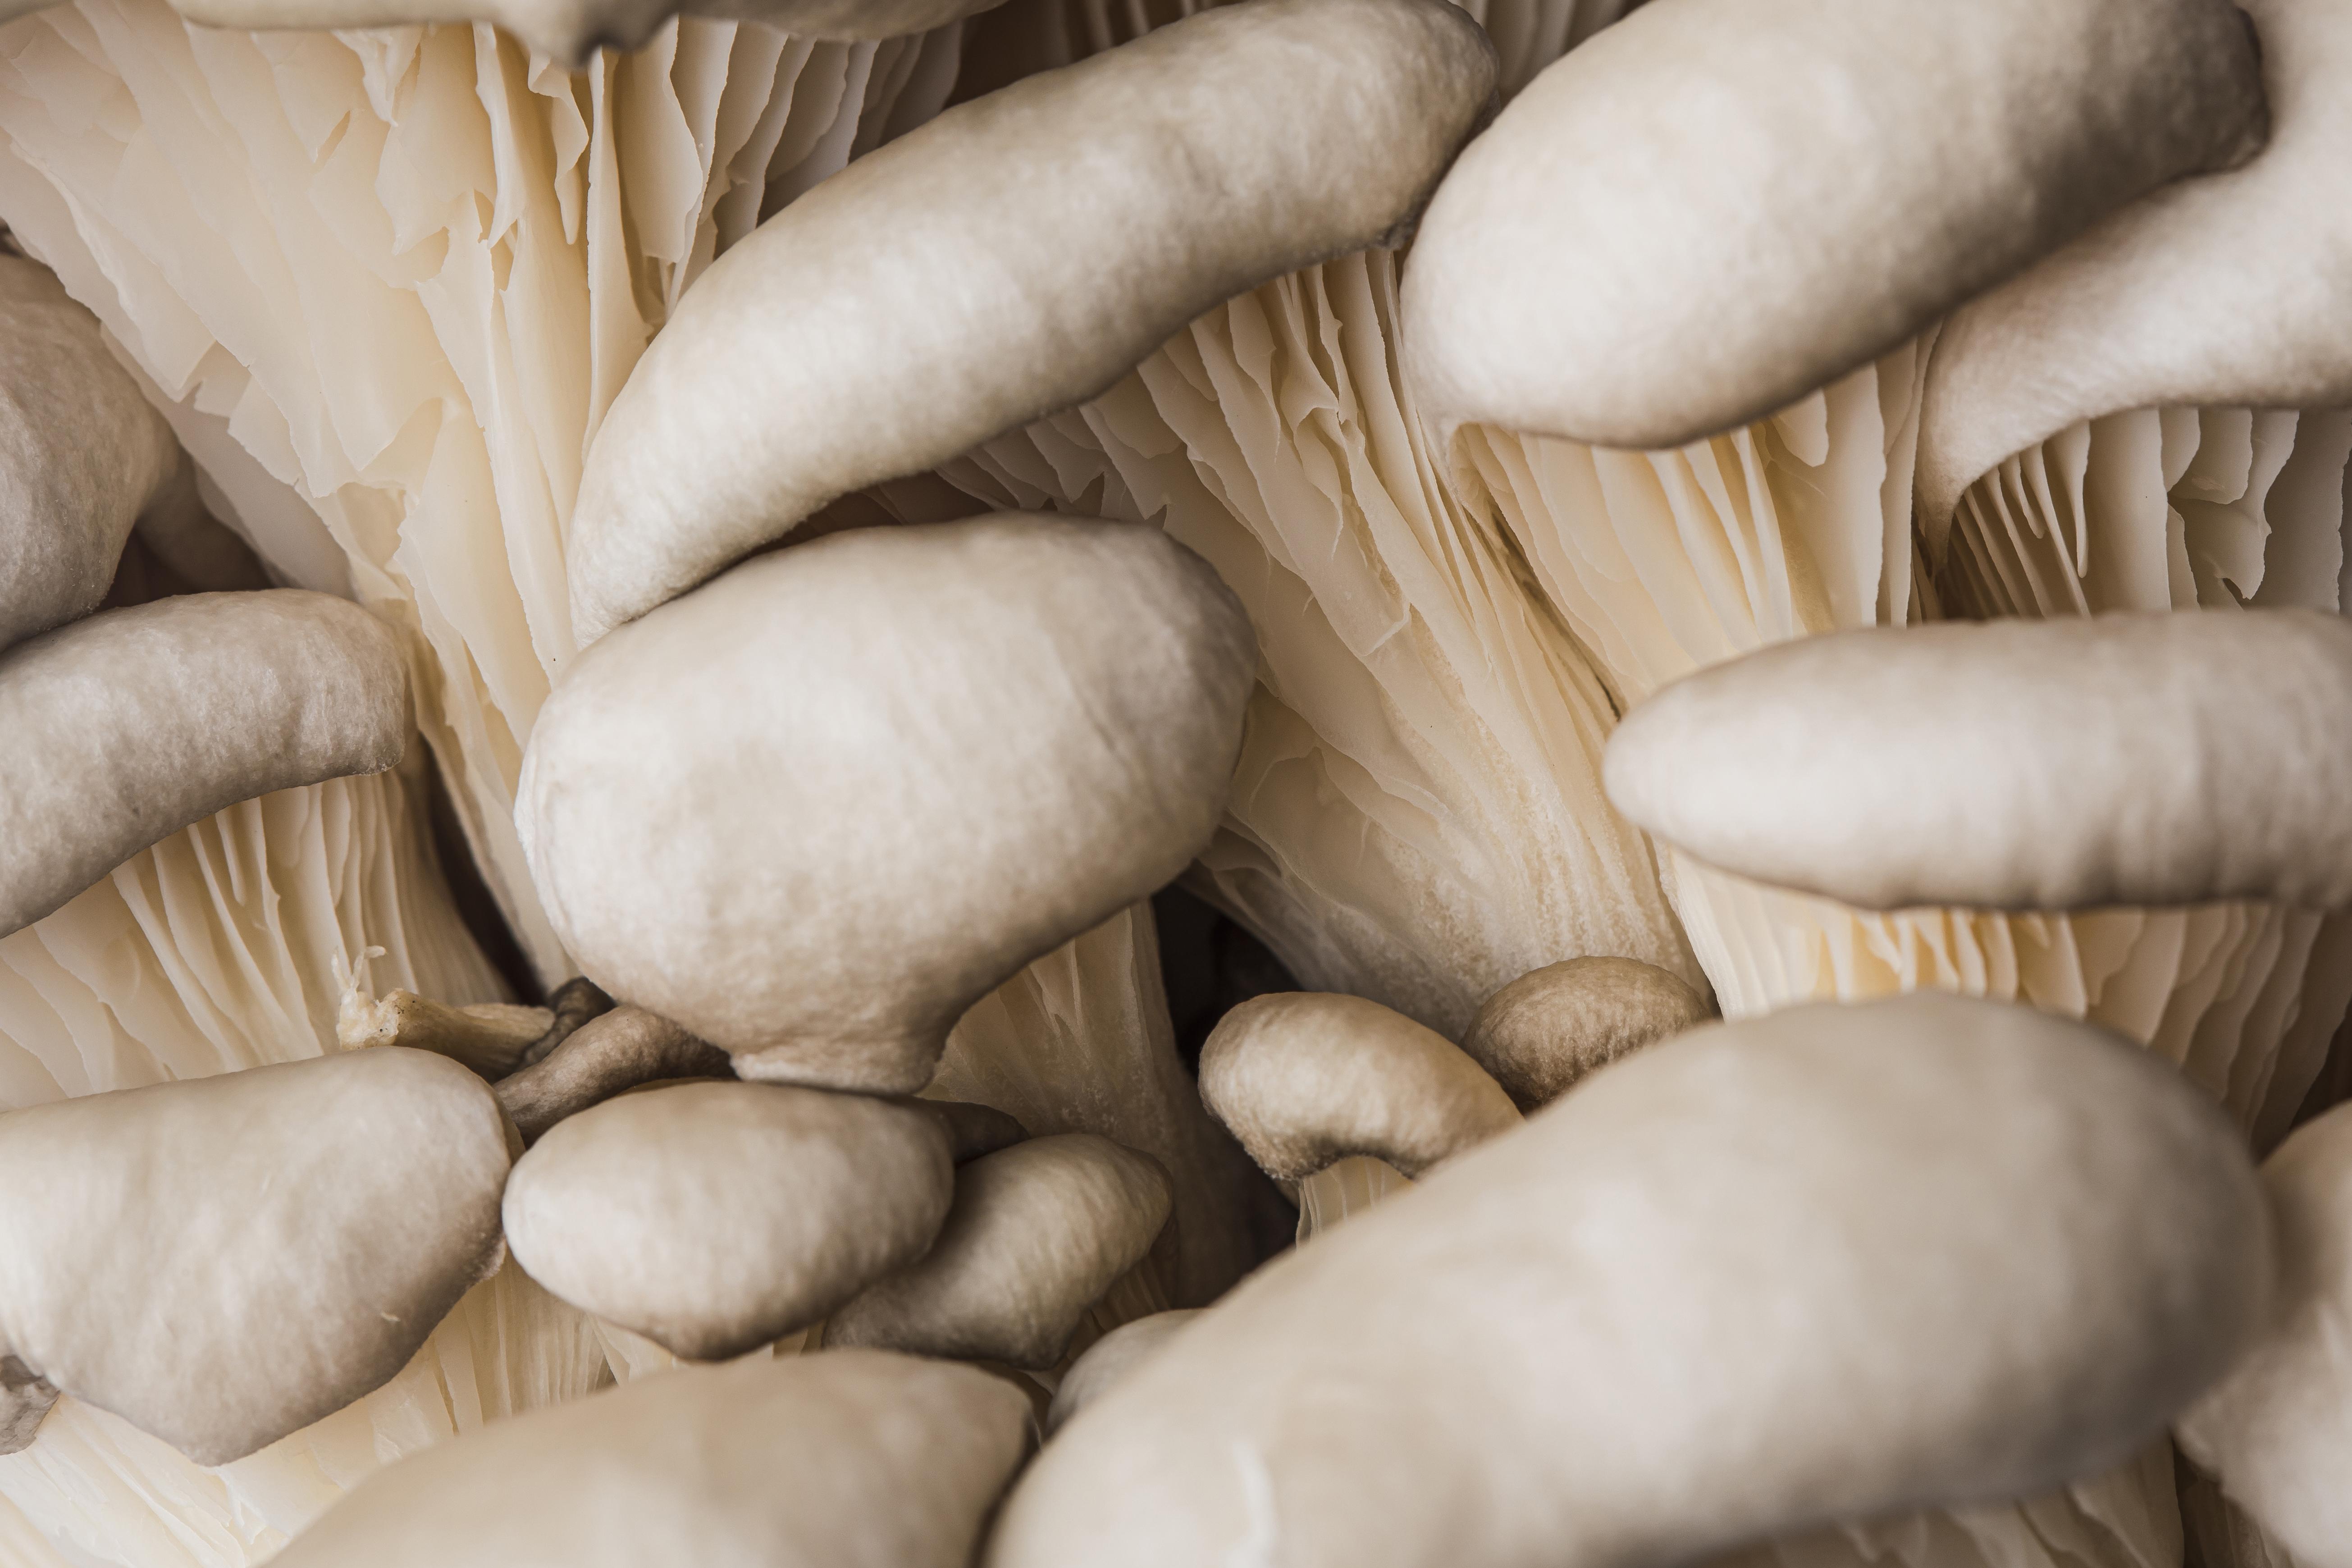 Buy Fresh Mushrooms Online: Your Guide to Finding Quality Fungi - Foraged -  Foraged